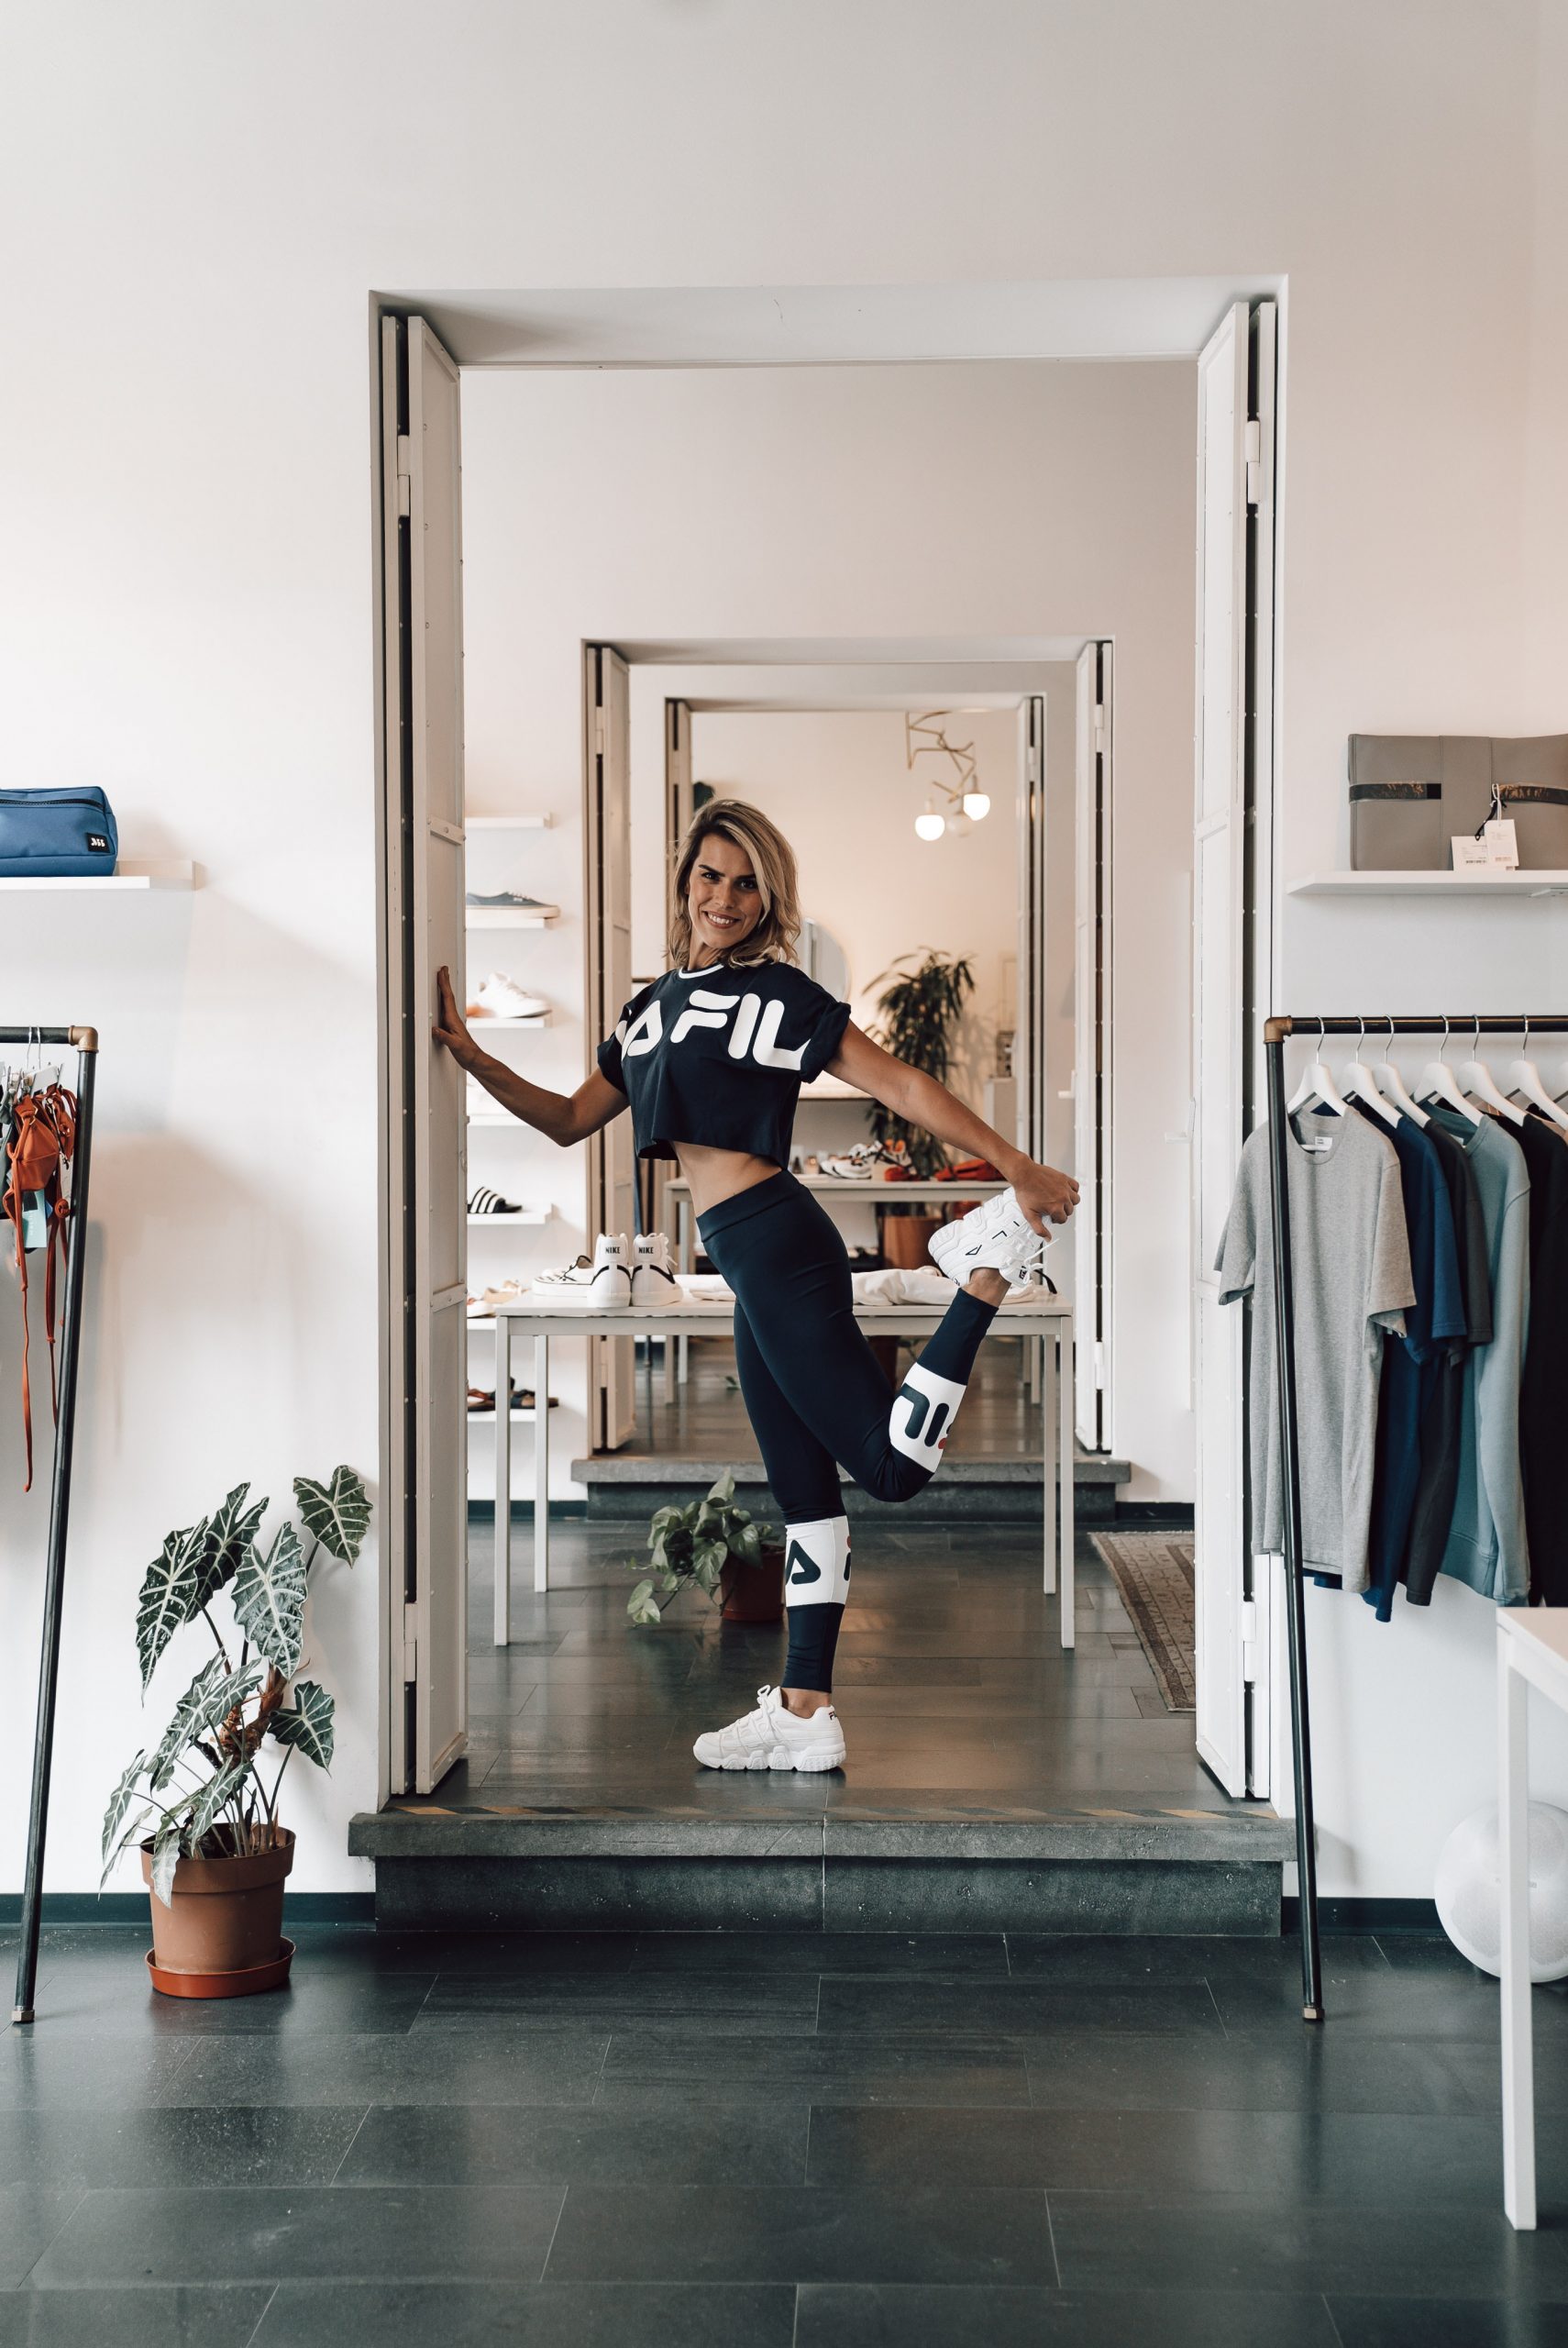 Do You Need to Spend a Lot of Money on Workout Clothes to Be a Good Athlete?